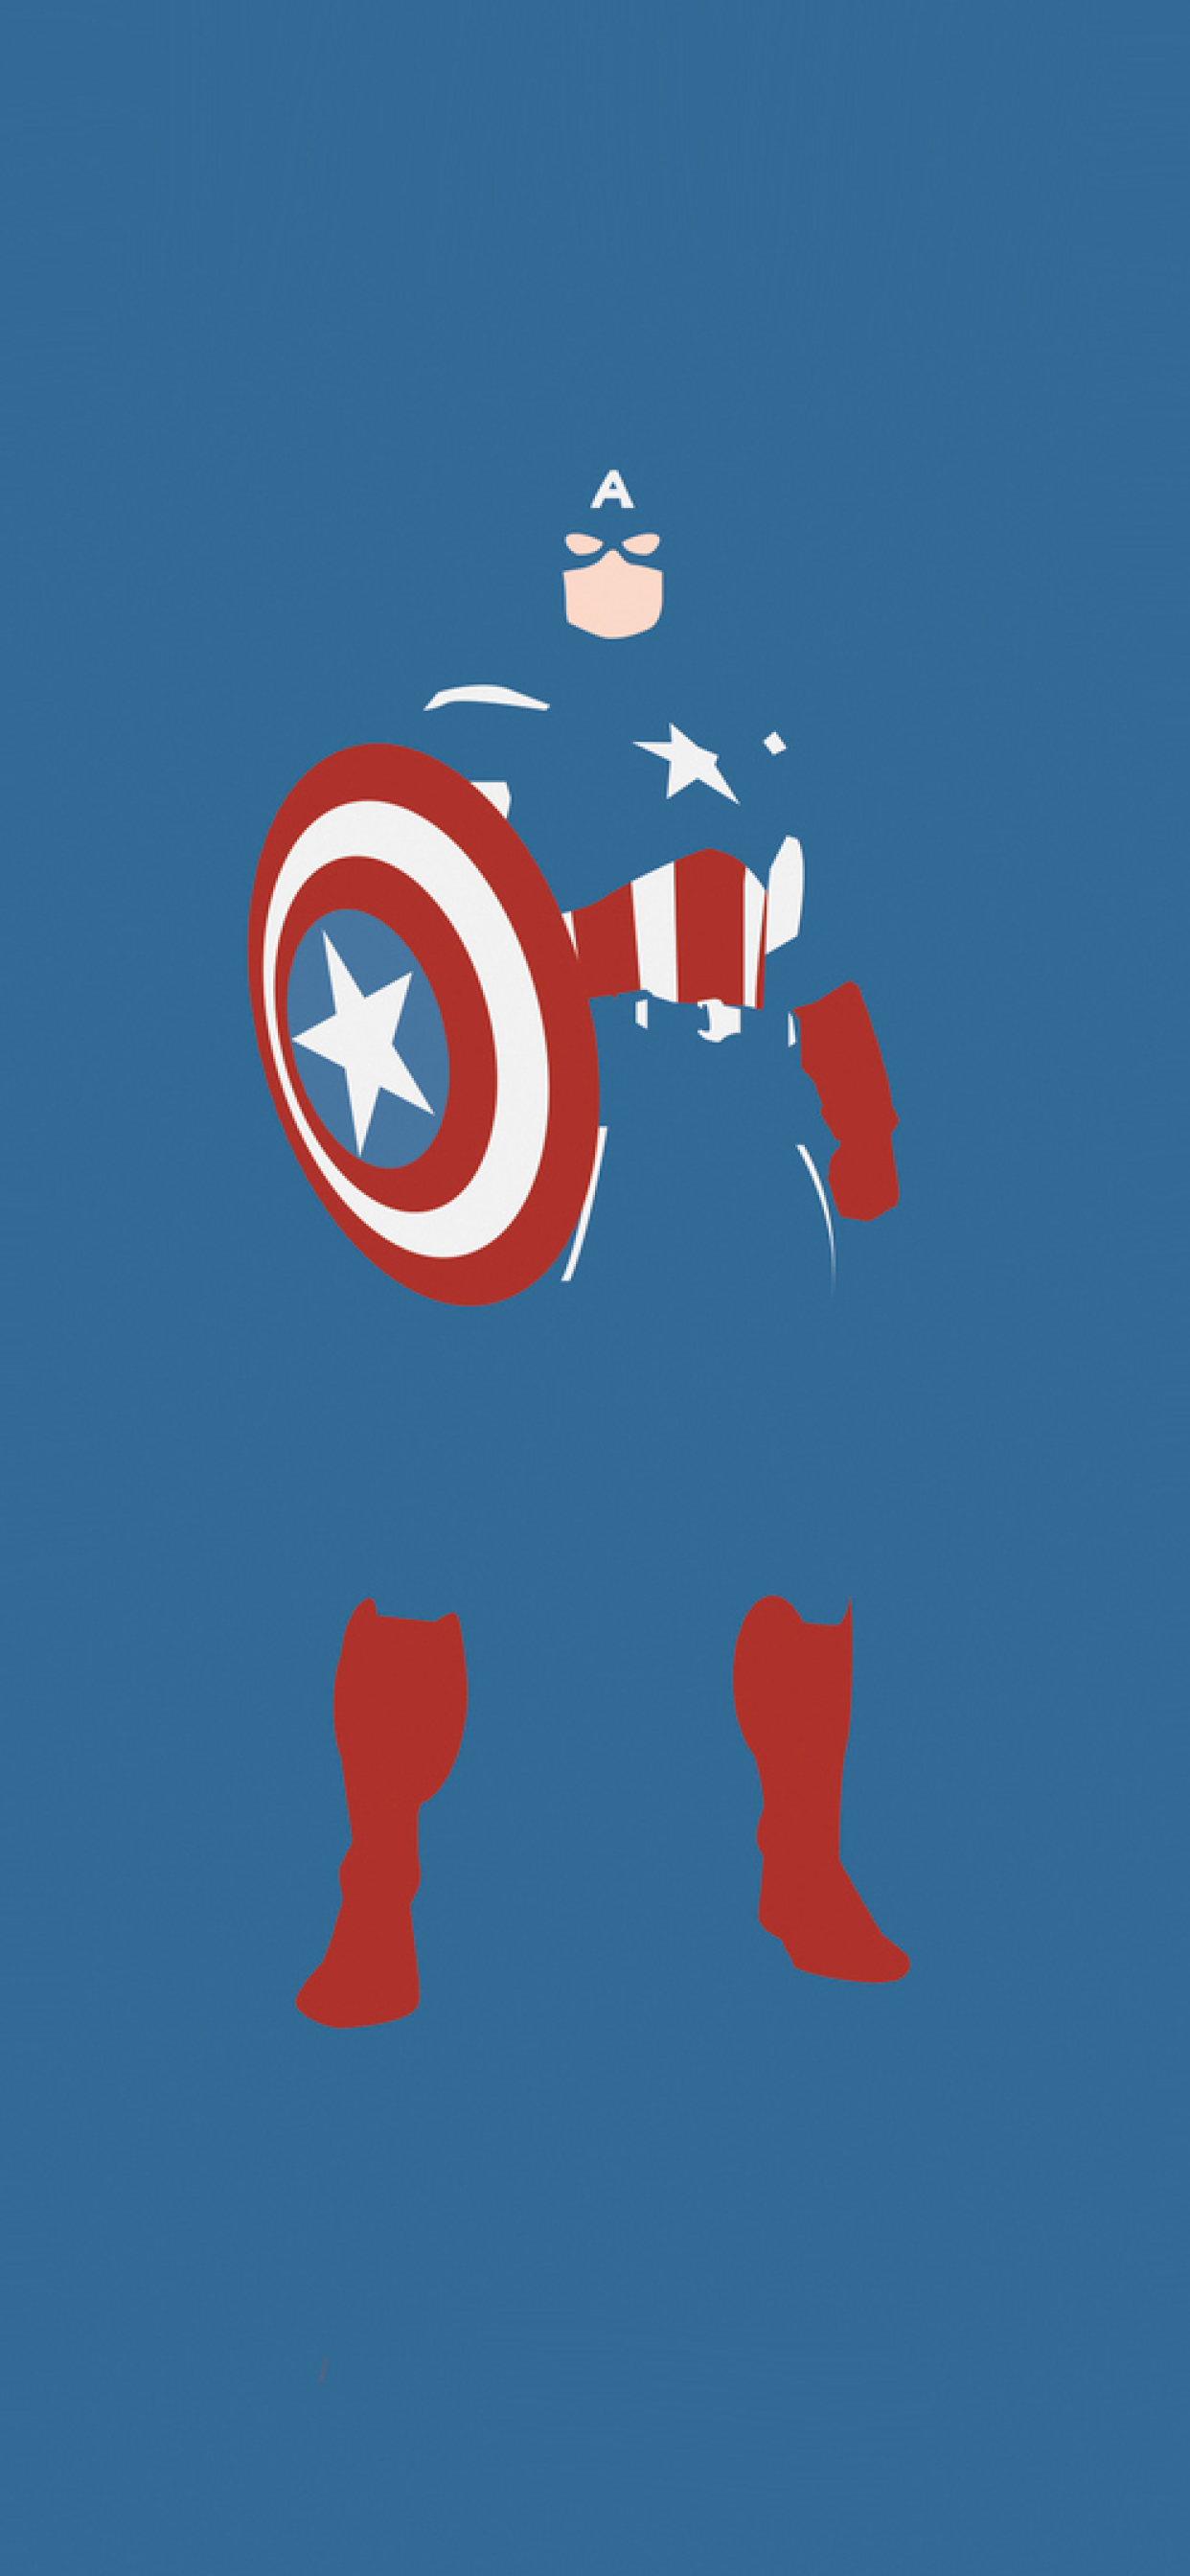 1242x26 Captain America Marvel Comics Minimalism Iphone Xs Max Wallpaper Hd Minimalist 4k Wallpapers Images Photos And Background Wallpapers Den